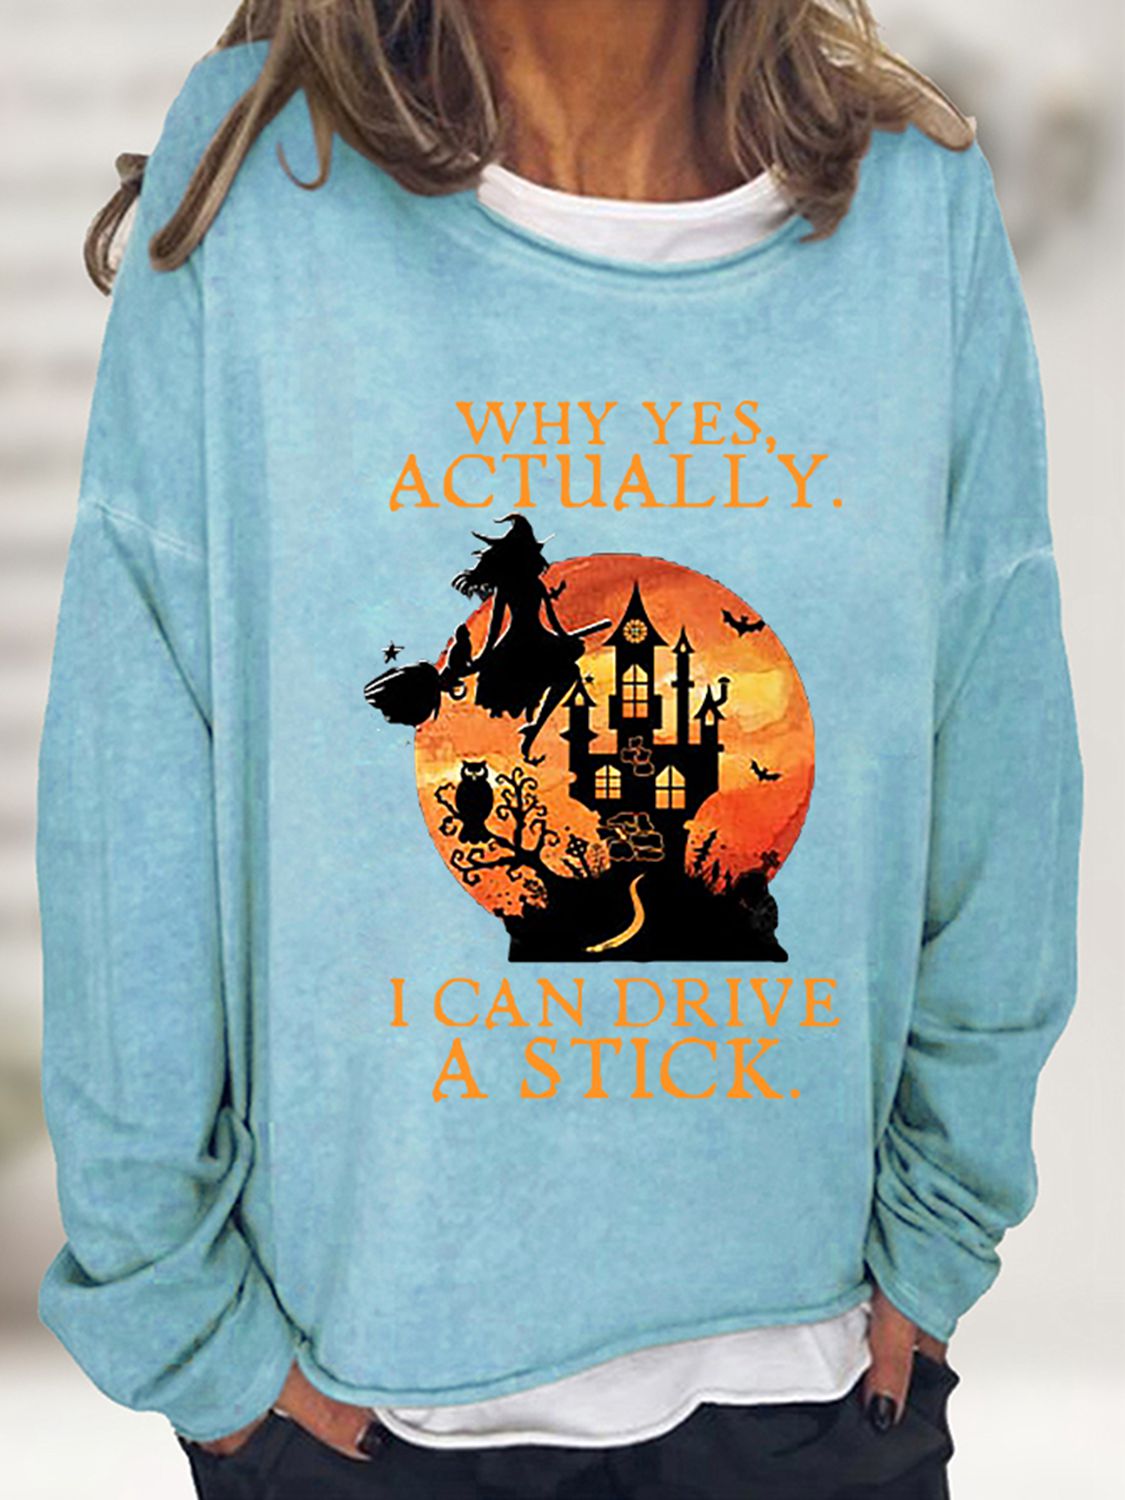 Why Yes Actually I Can Drive A Stick Sweatshirt - Light Blue / S - T-Shirts - Shirts & Tops - 19 - 2024